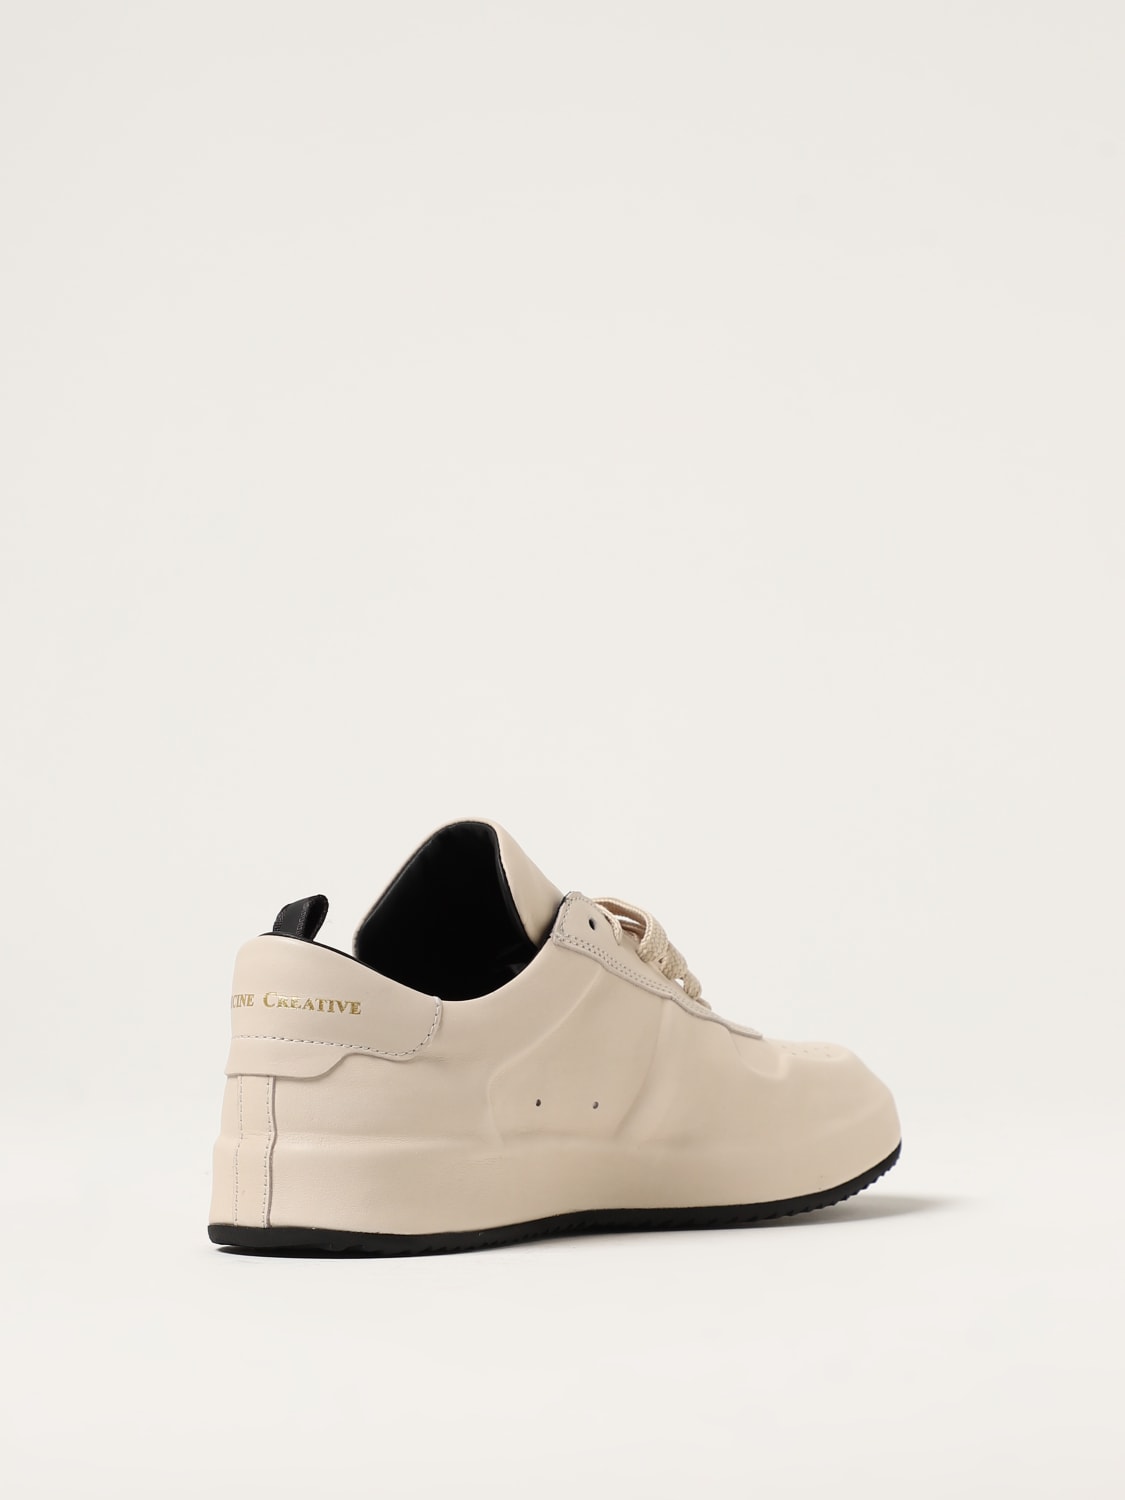 OFFICINE CREATIVE: sneakers for man - Black | Officine Creative ...